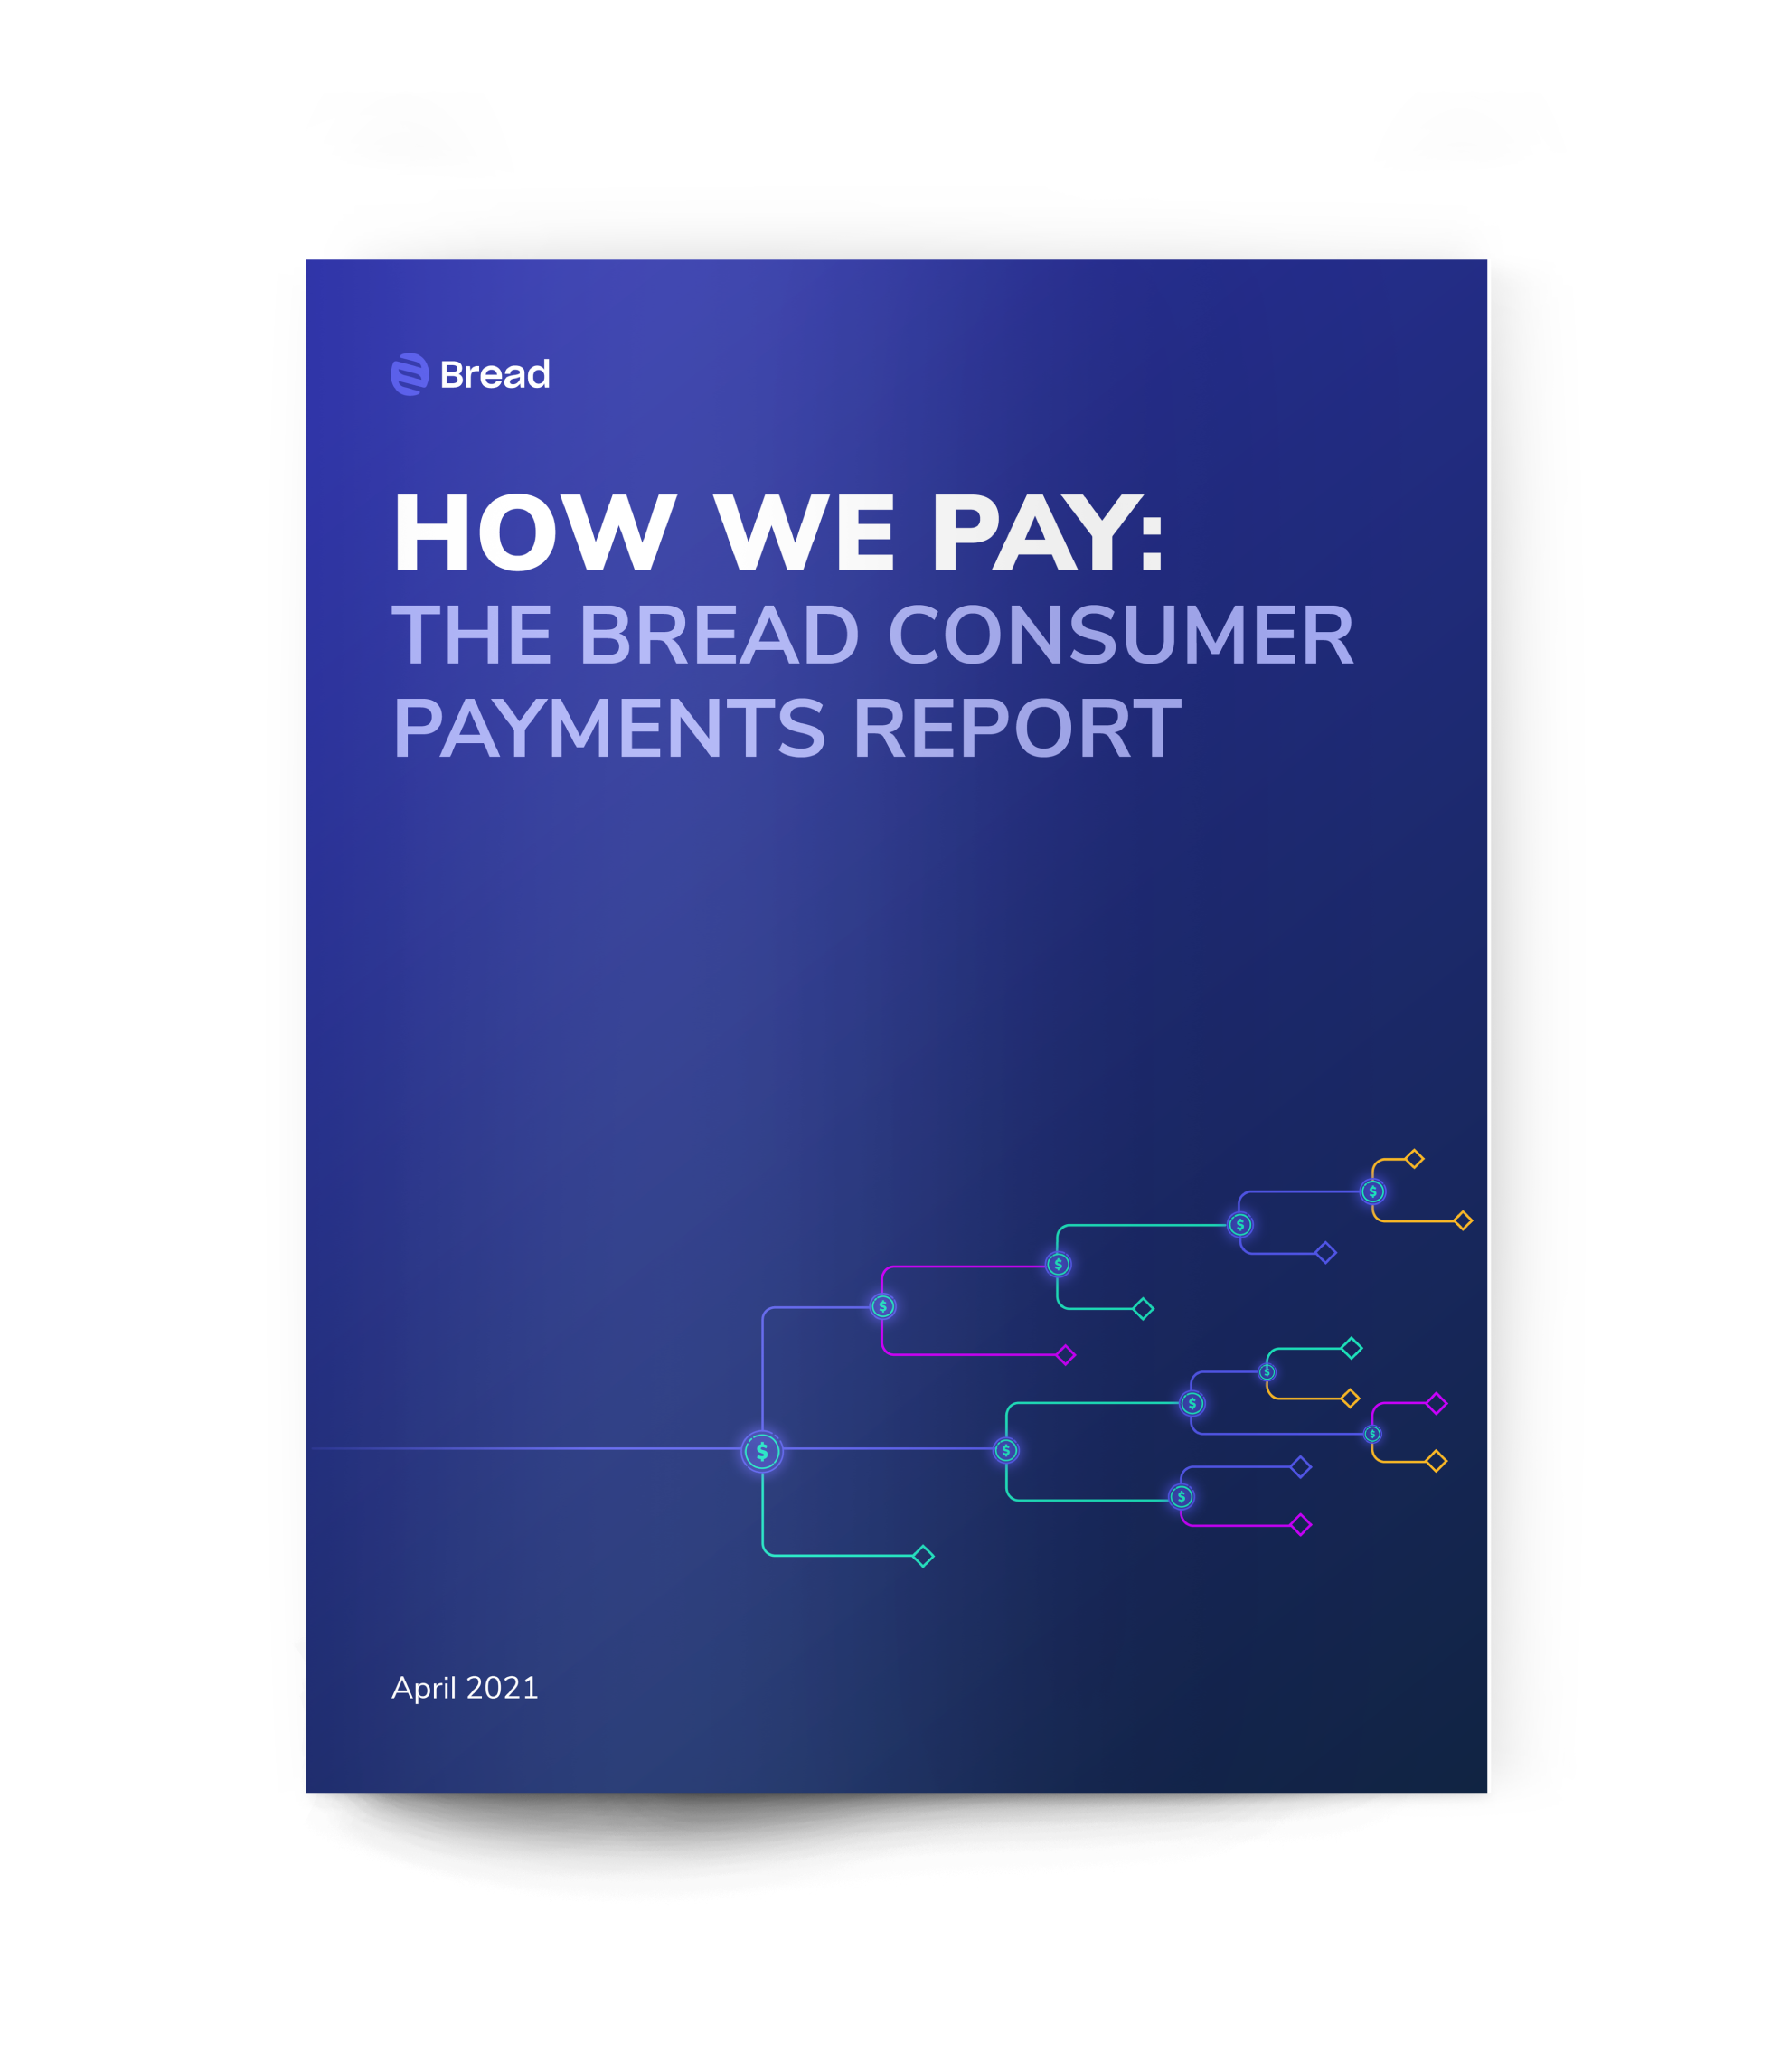 How We Pay: The Bread Consumer Payments Report